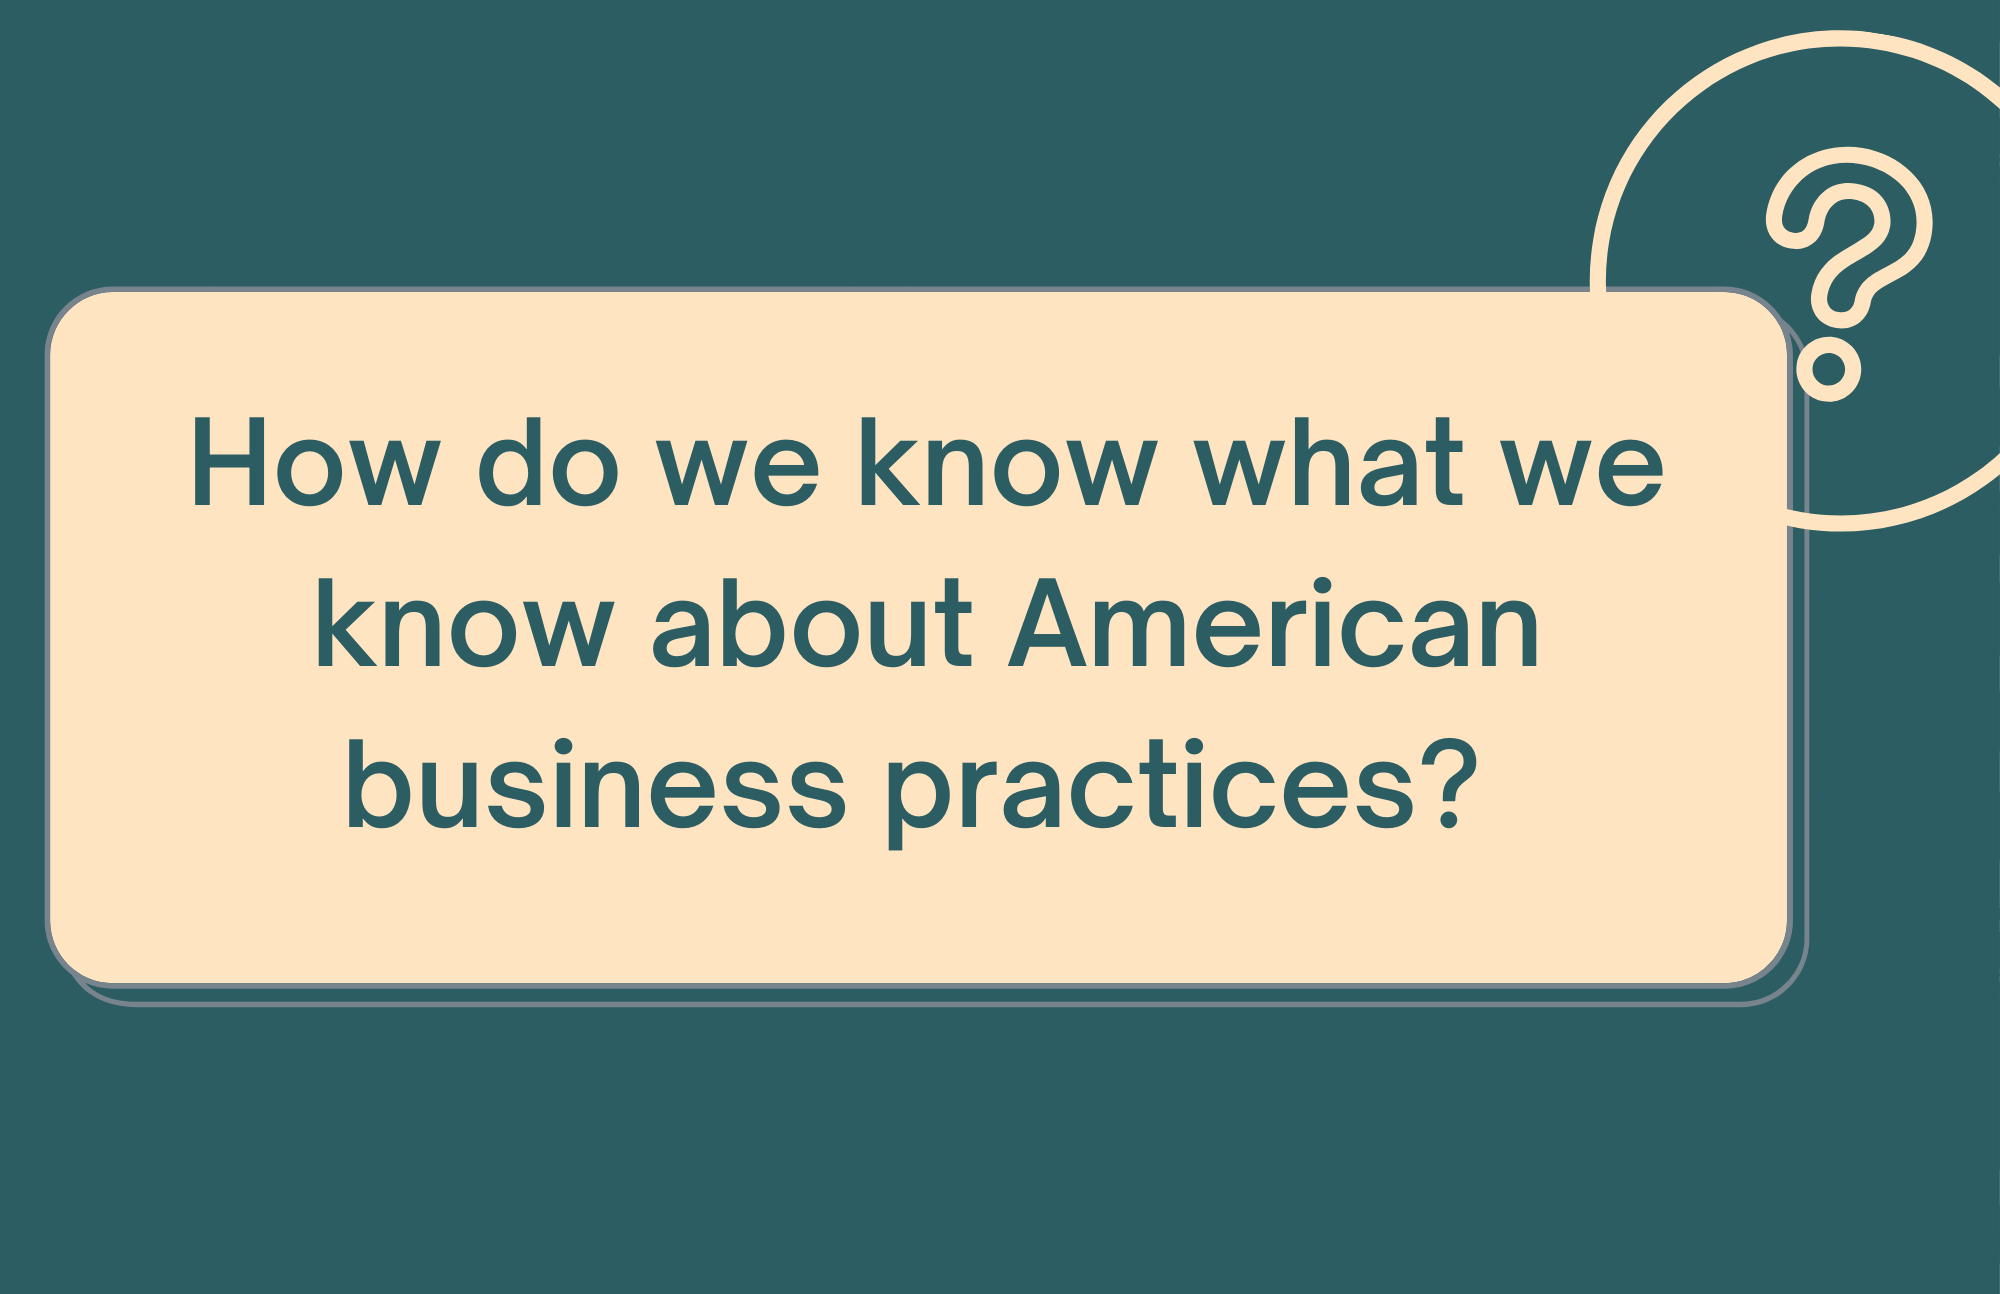 [quote card] How do we know what we know about American business practices? 